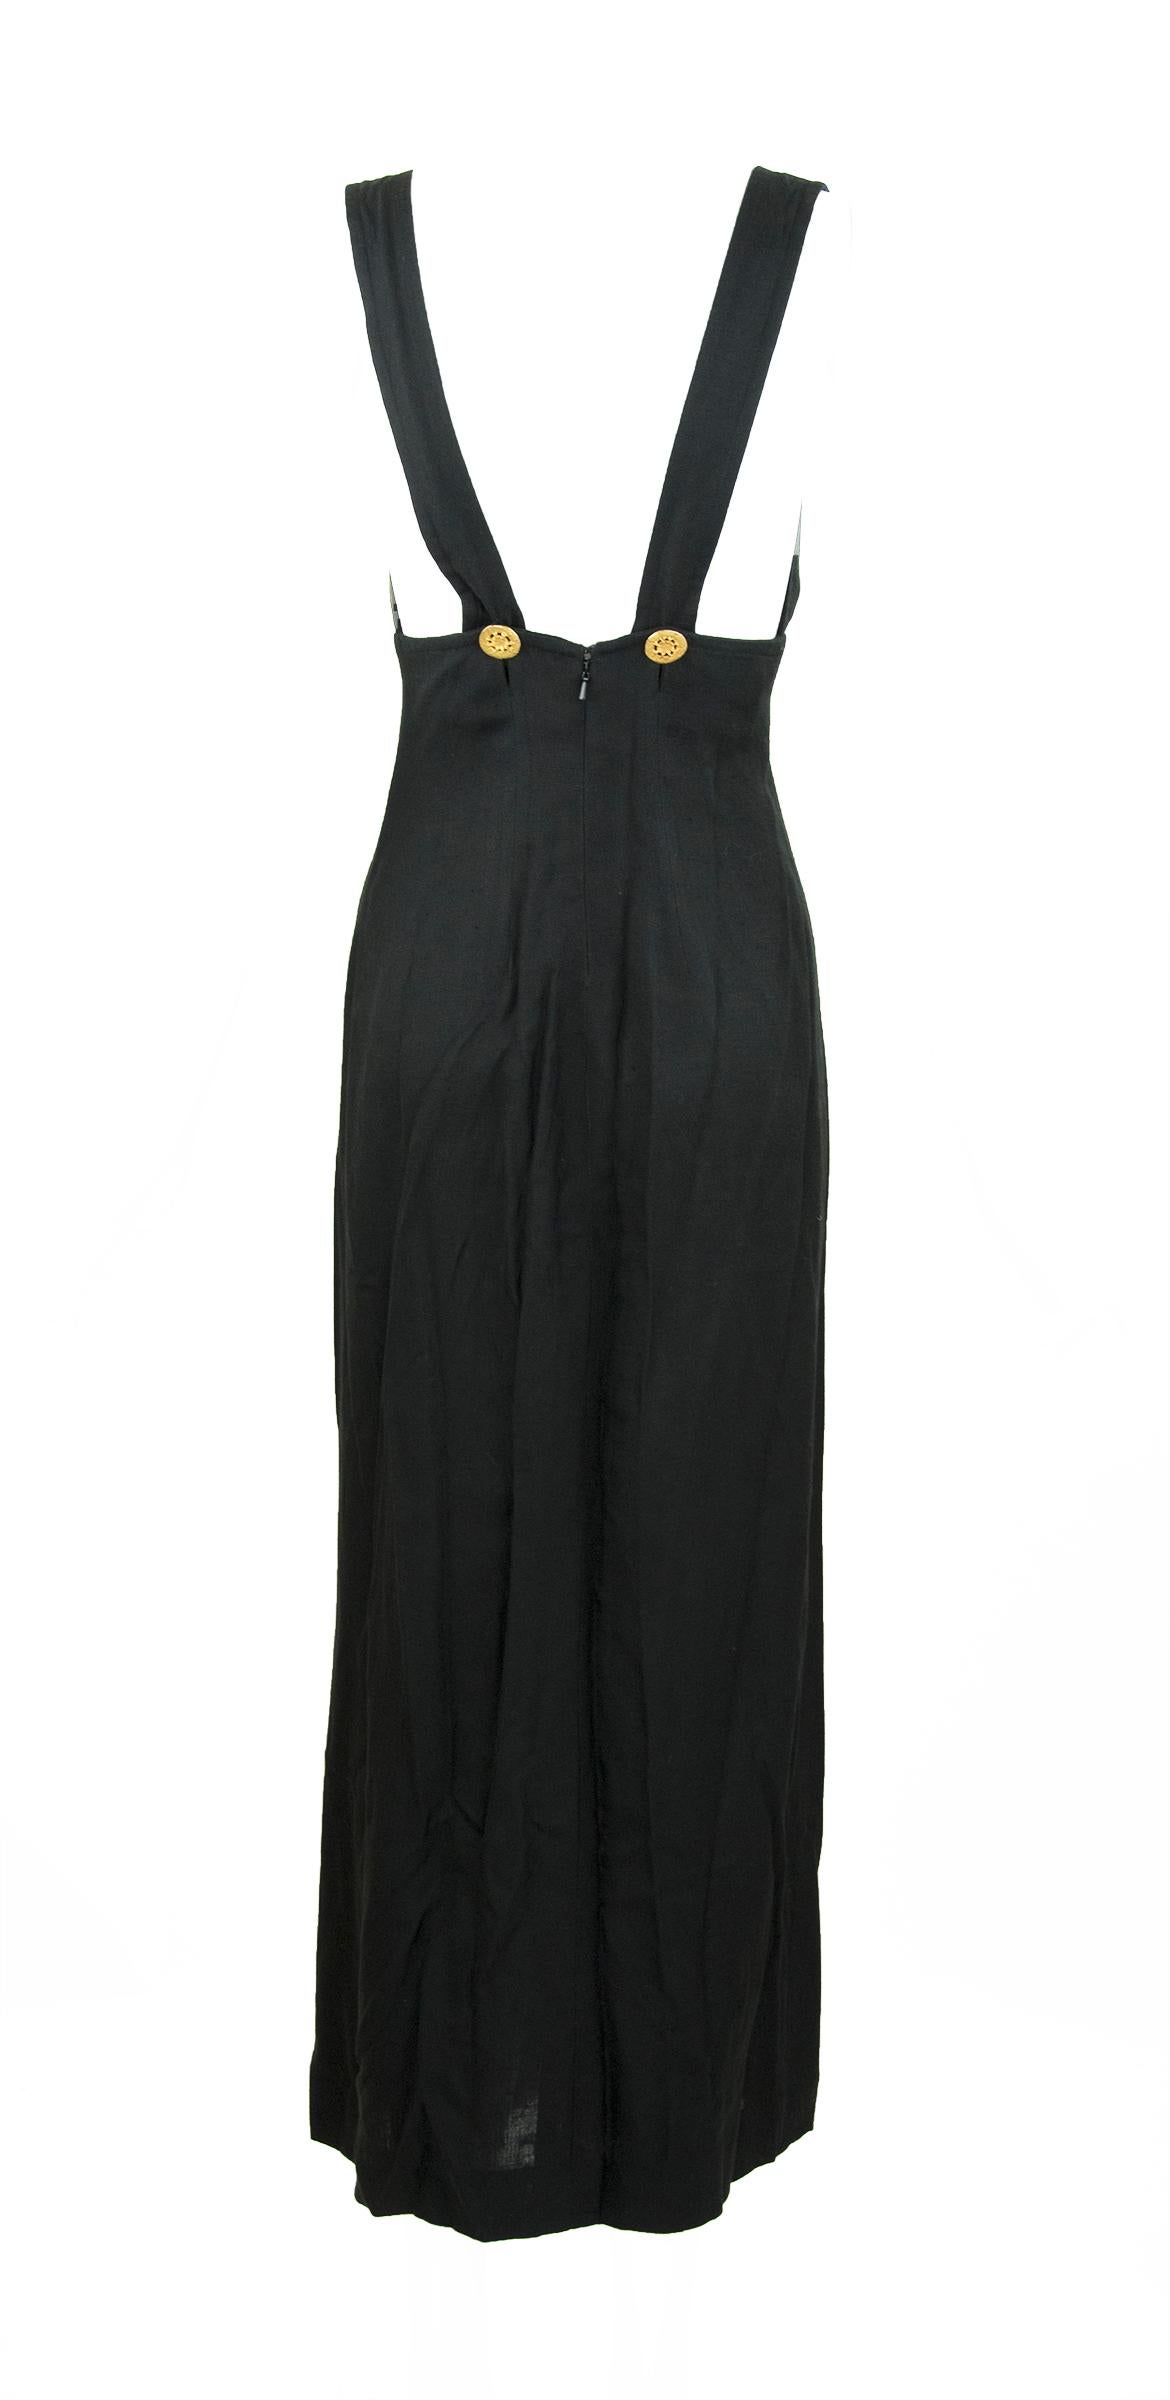 Incredible original Christian Lacroix long black dress with gold hardware detail between the bust.  Features two gold buttons on the back straps and a sexy high slit.

Size: FR 38

Condition: Pristine

Composition: 100% viscose

Made in France